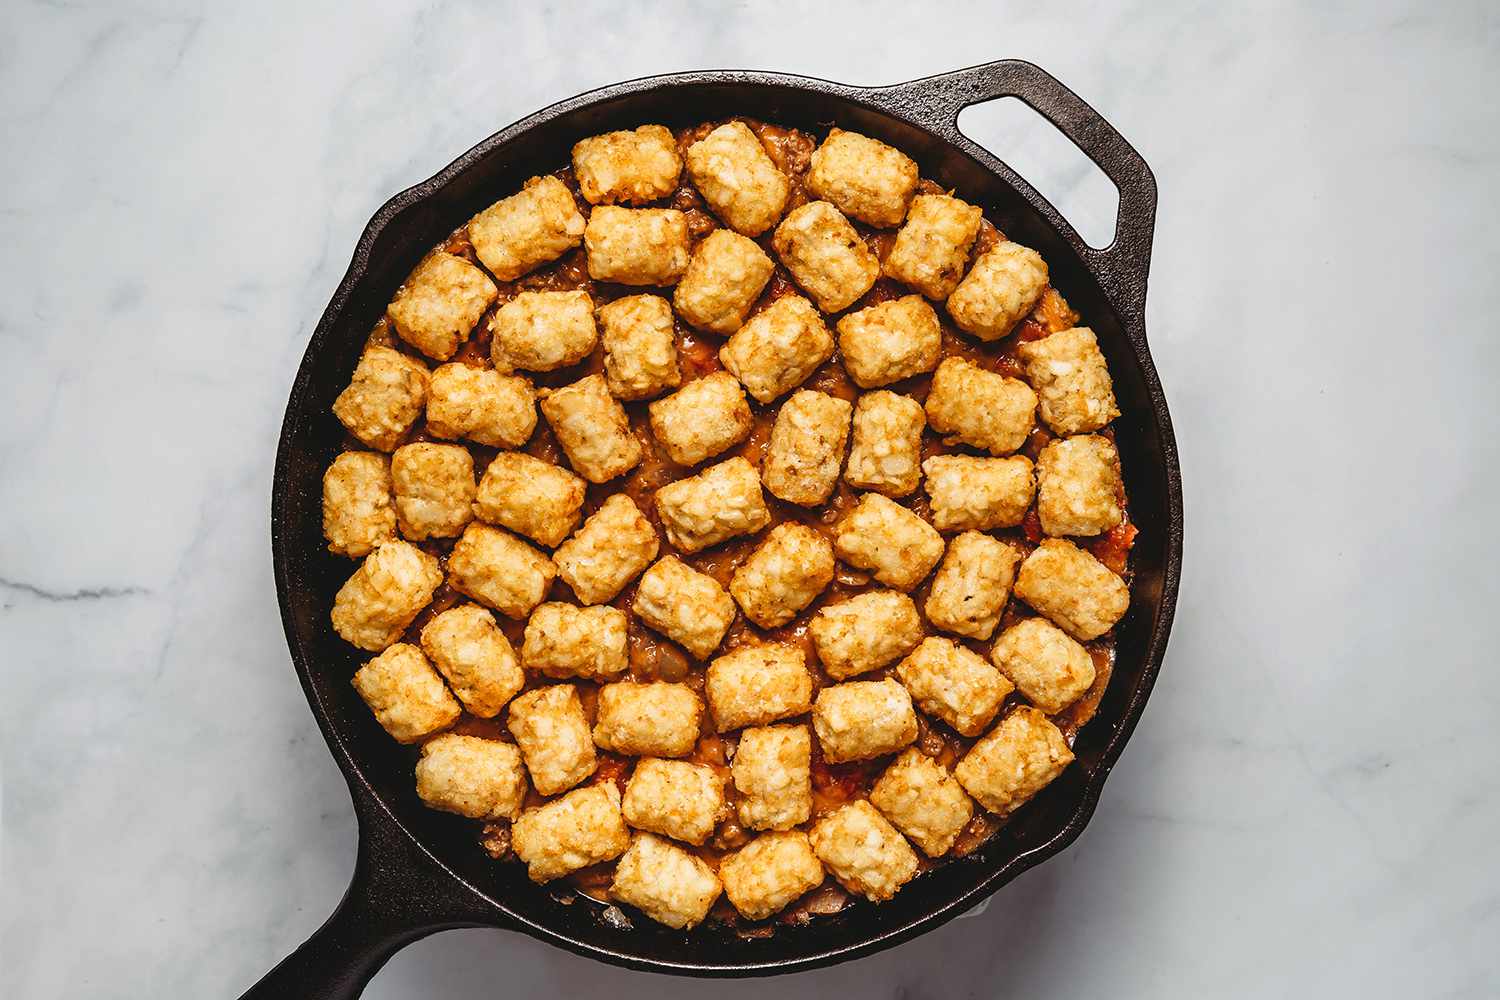 Tater tots on top of the beef mixture in the cast iron pan 